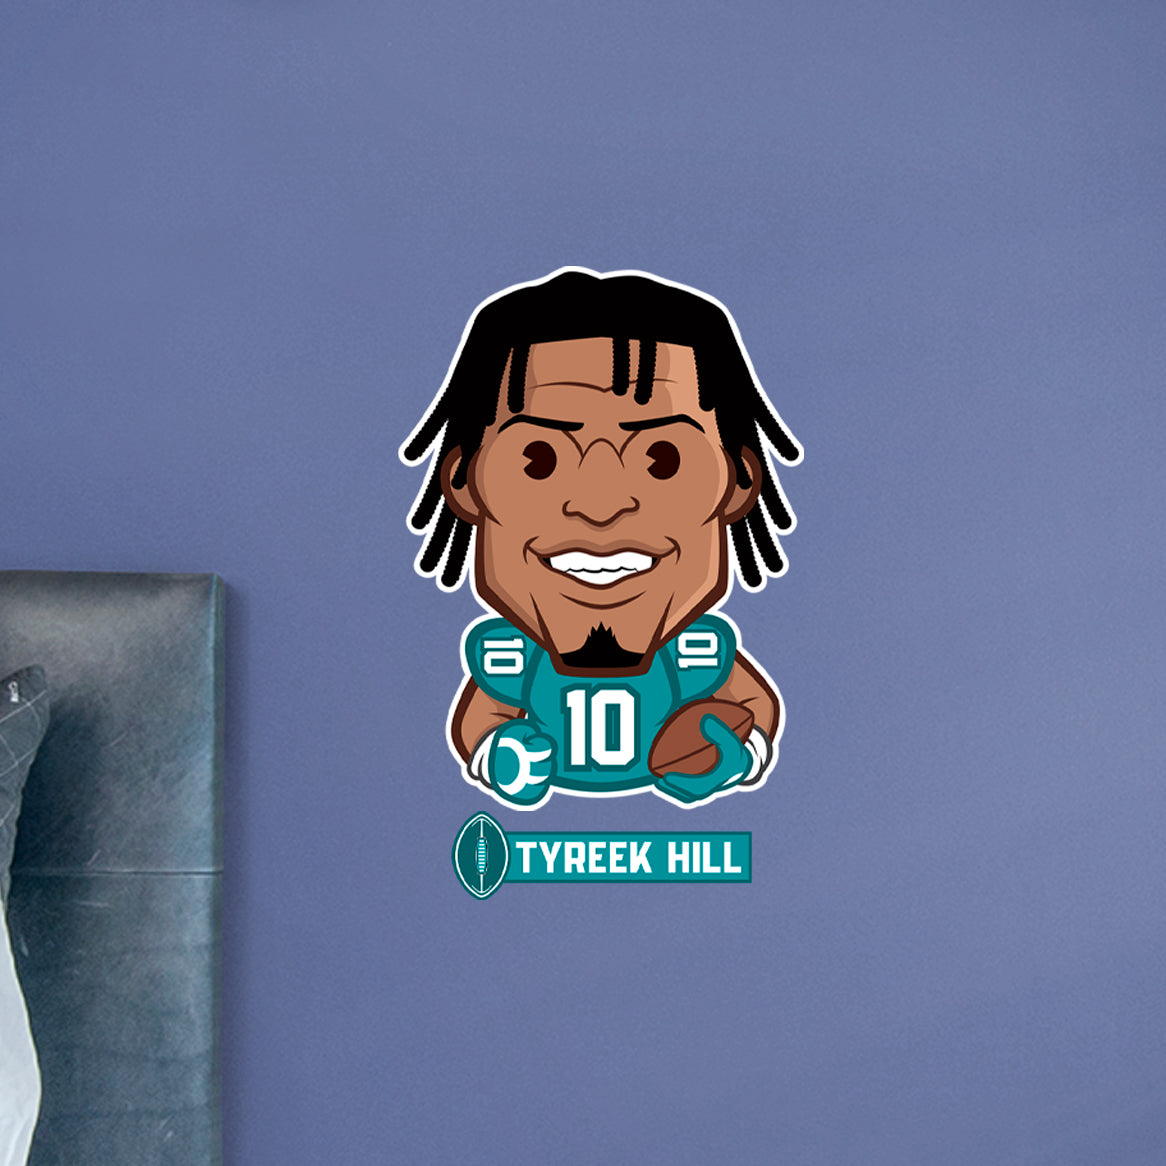 Miami Dolphins: Tyreek Hill  Emoji        - Officially Licensed NFLPA Removable     Adhesive Decal